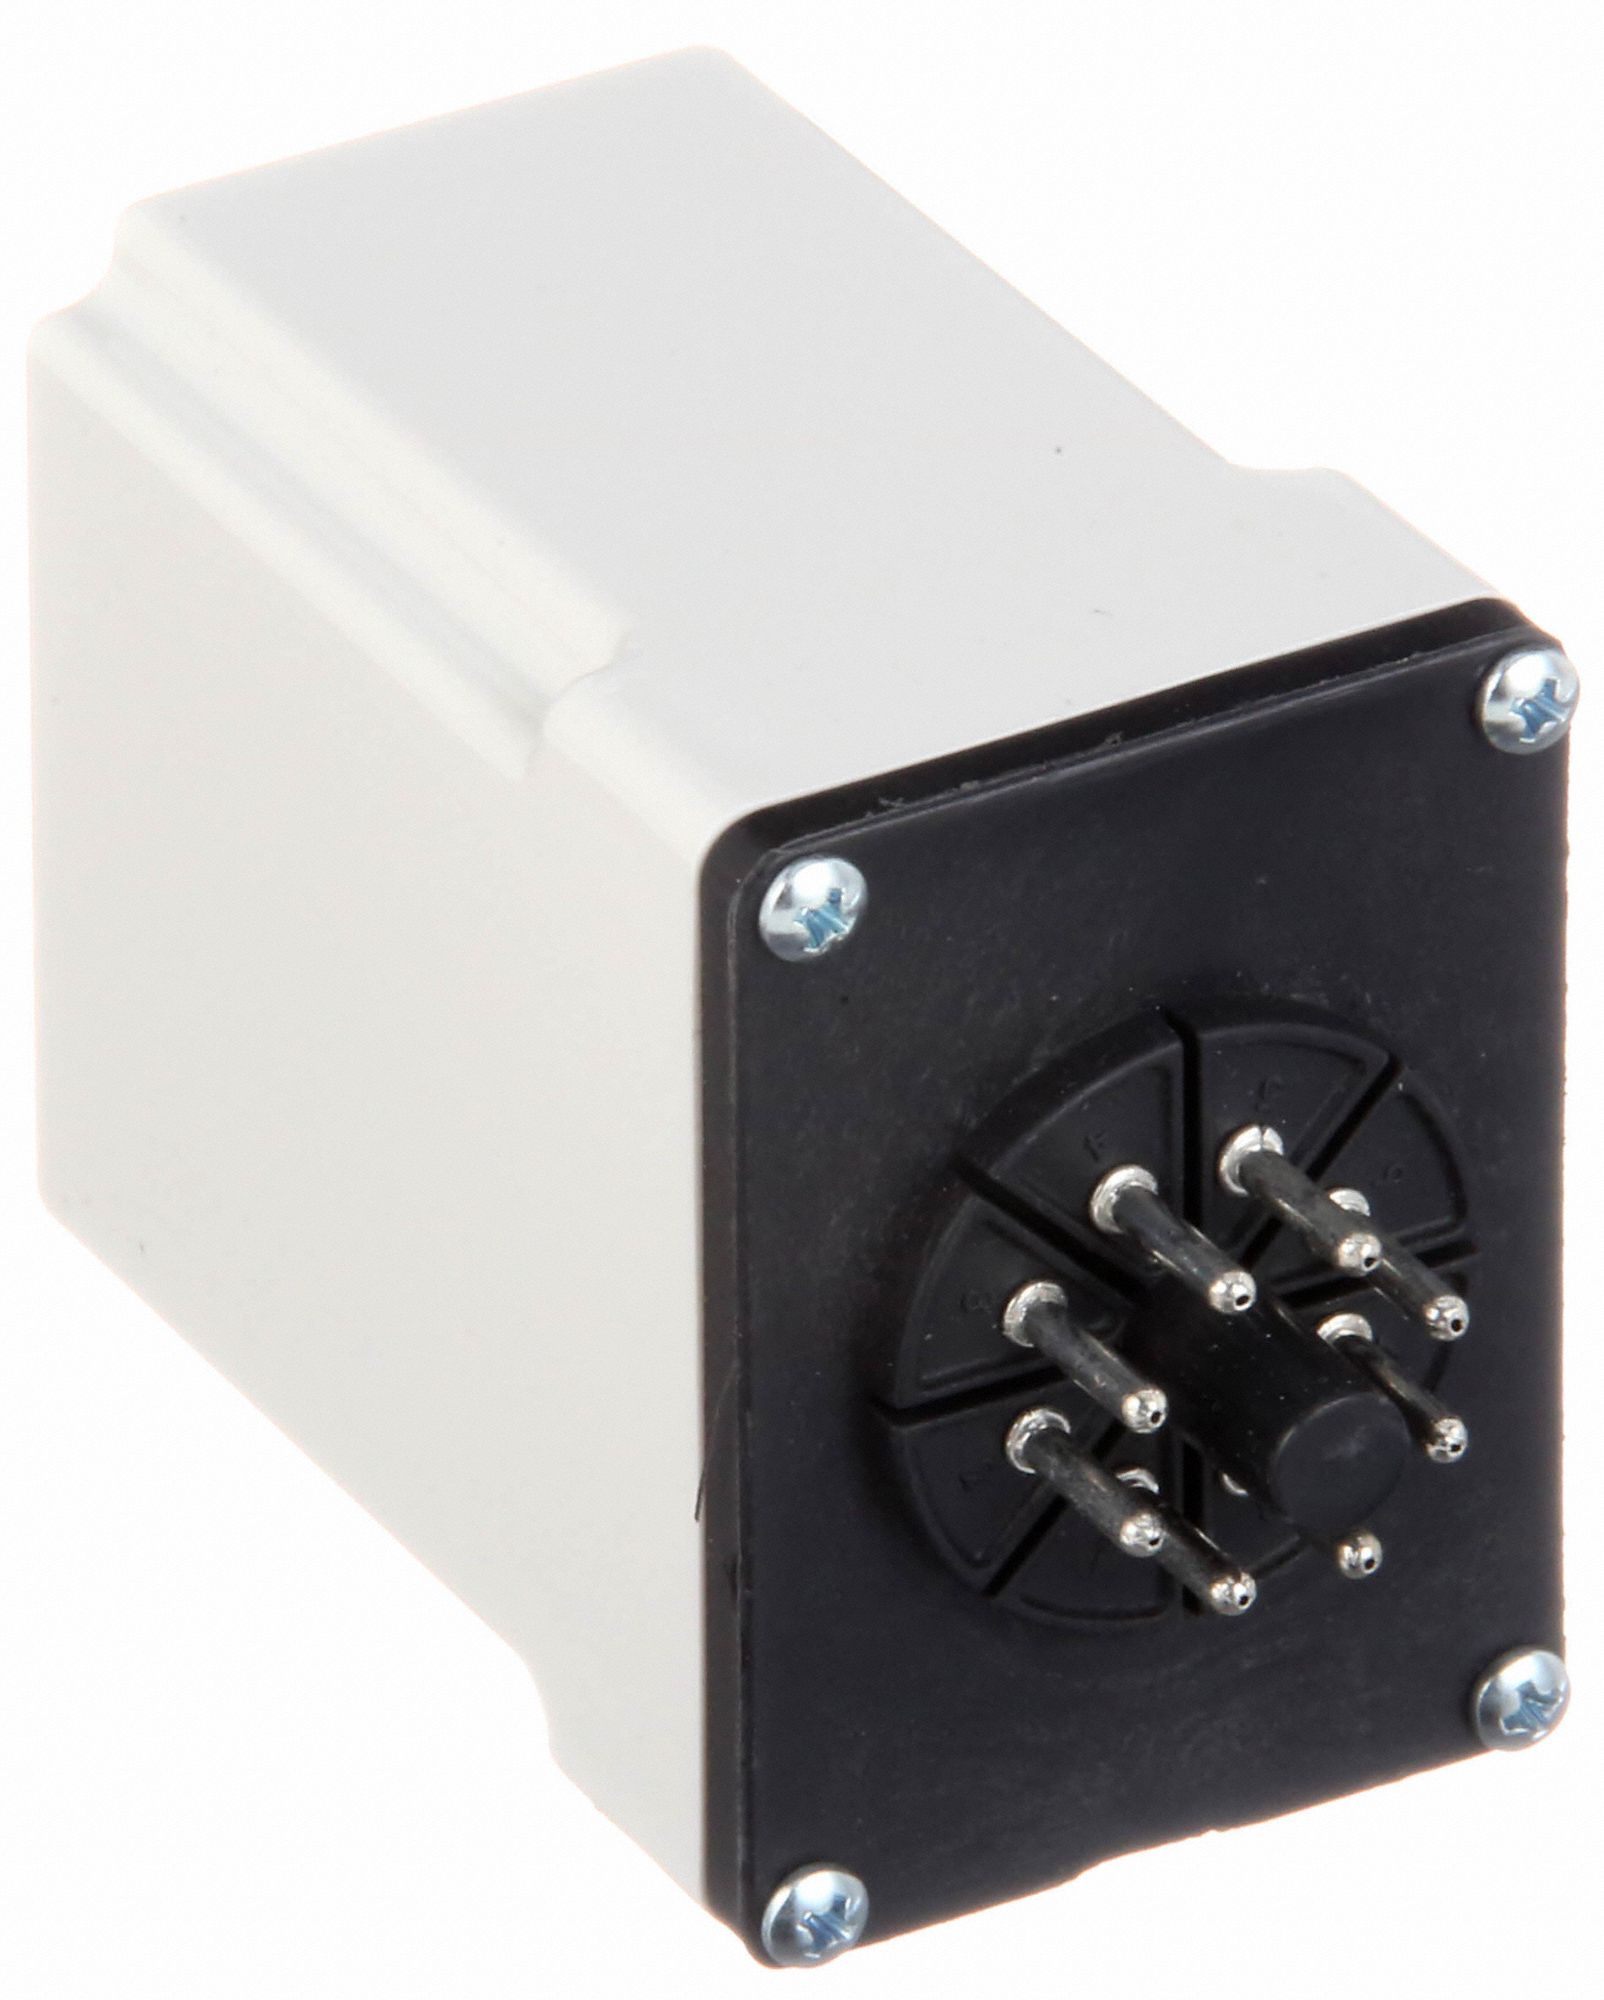 Details about   NEW SQUARE D 9050-HO-20E DC PNEUMATIC TIMING RELAY 